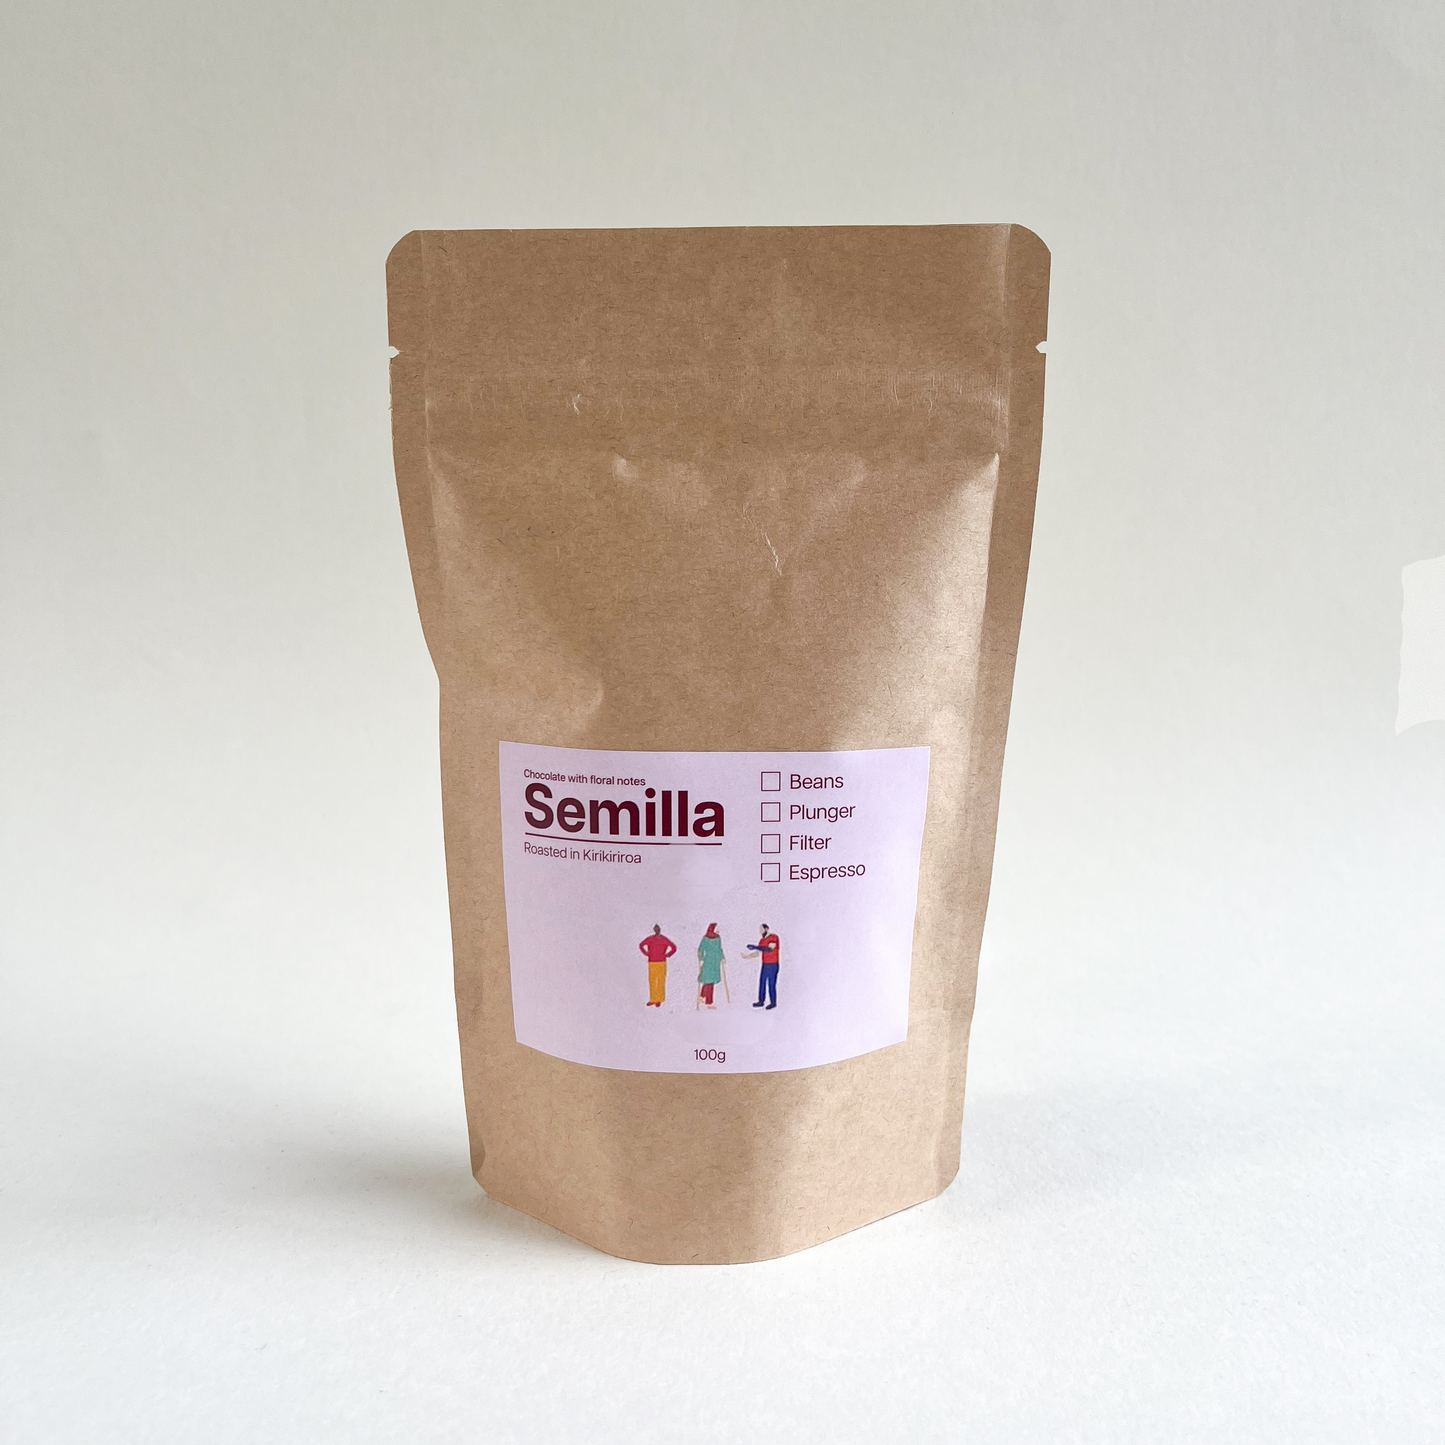 A kraft bag of TLF Semilla coffee with pink label